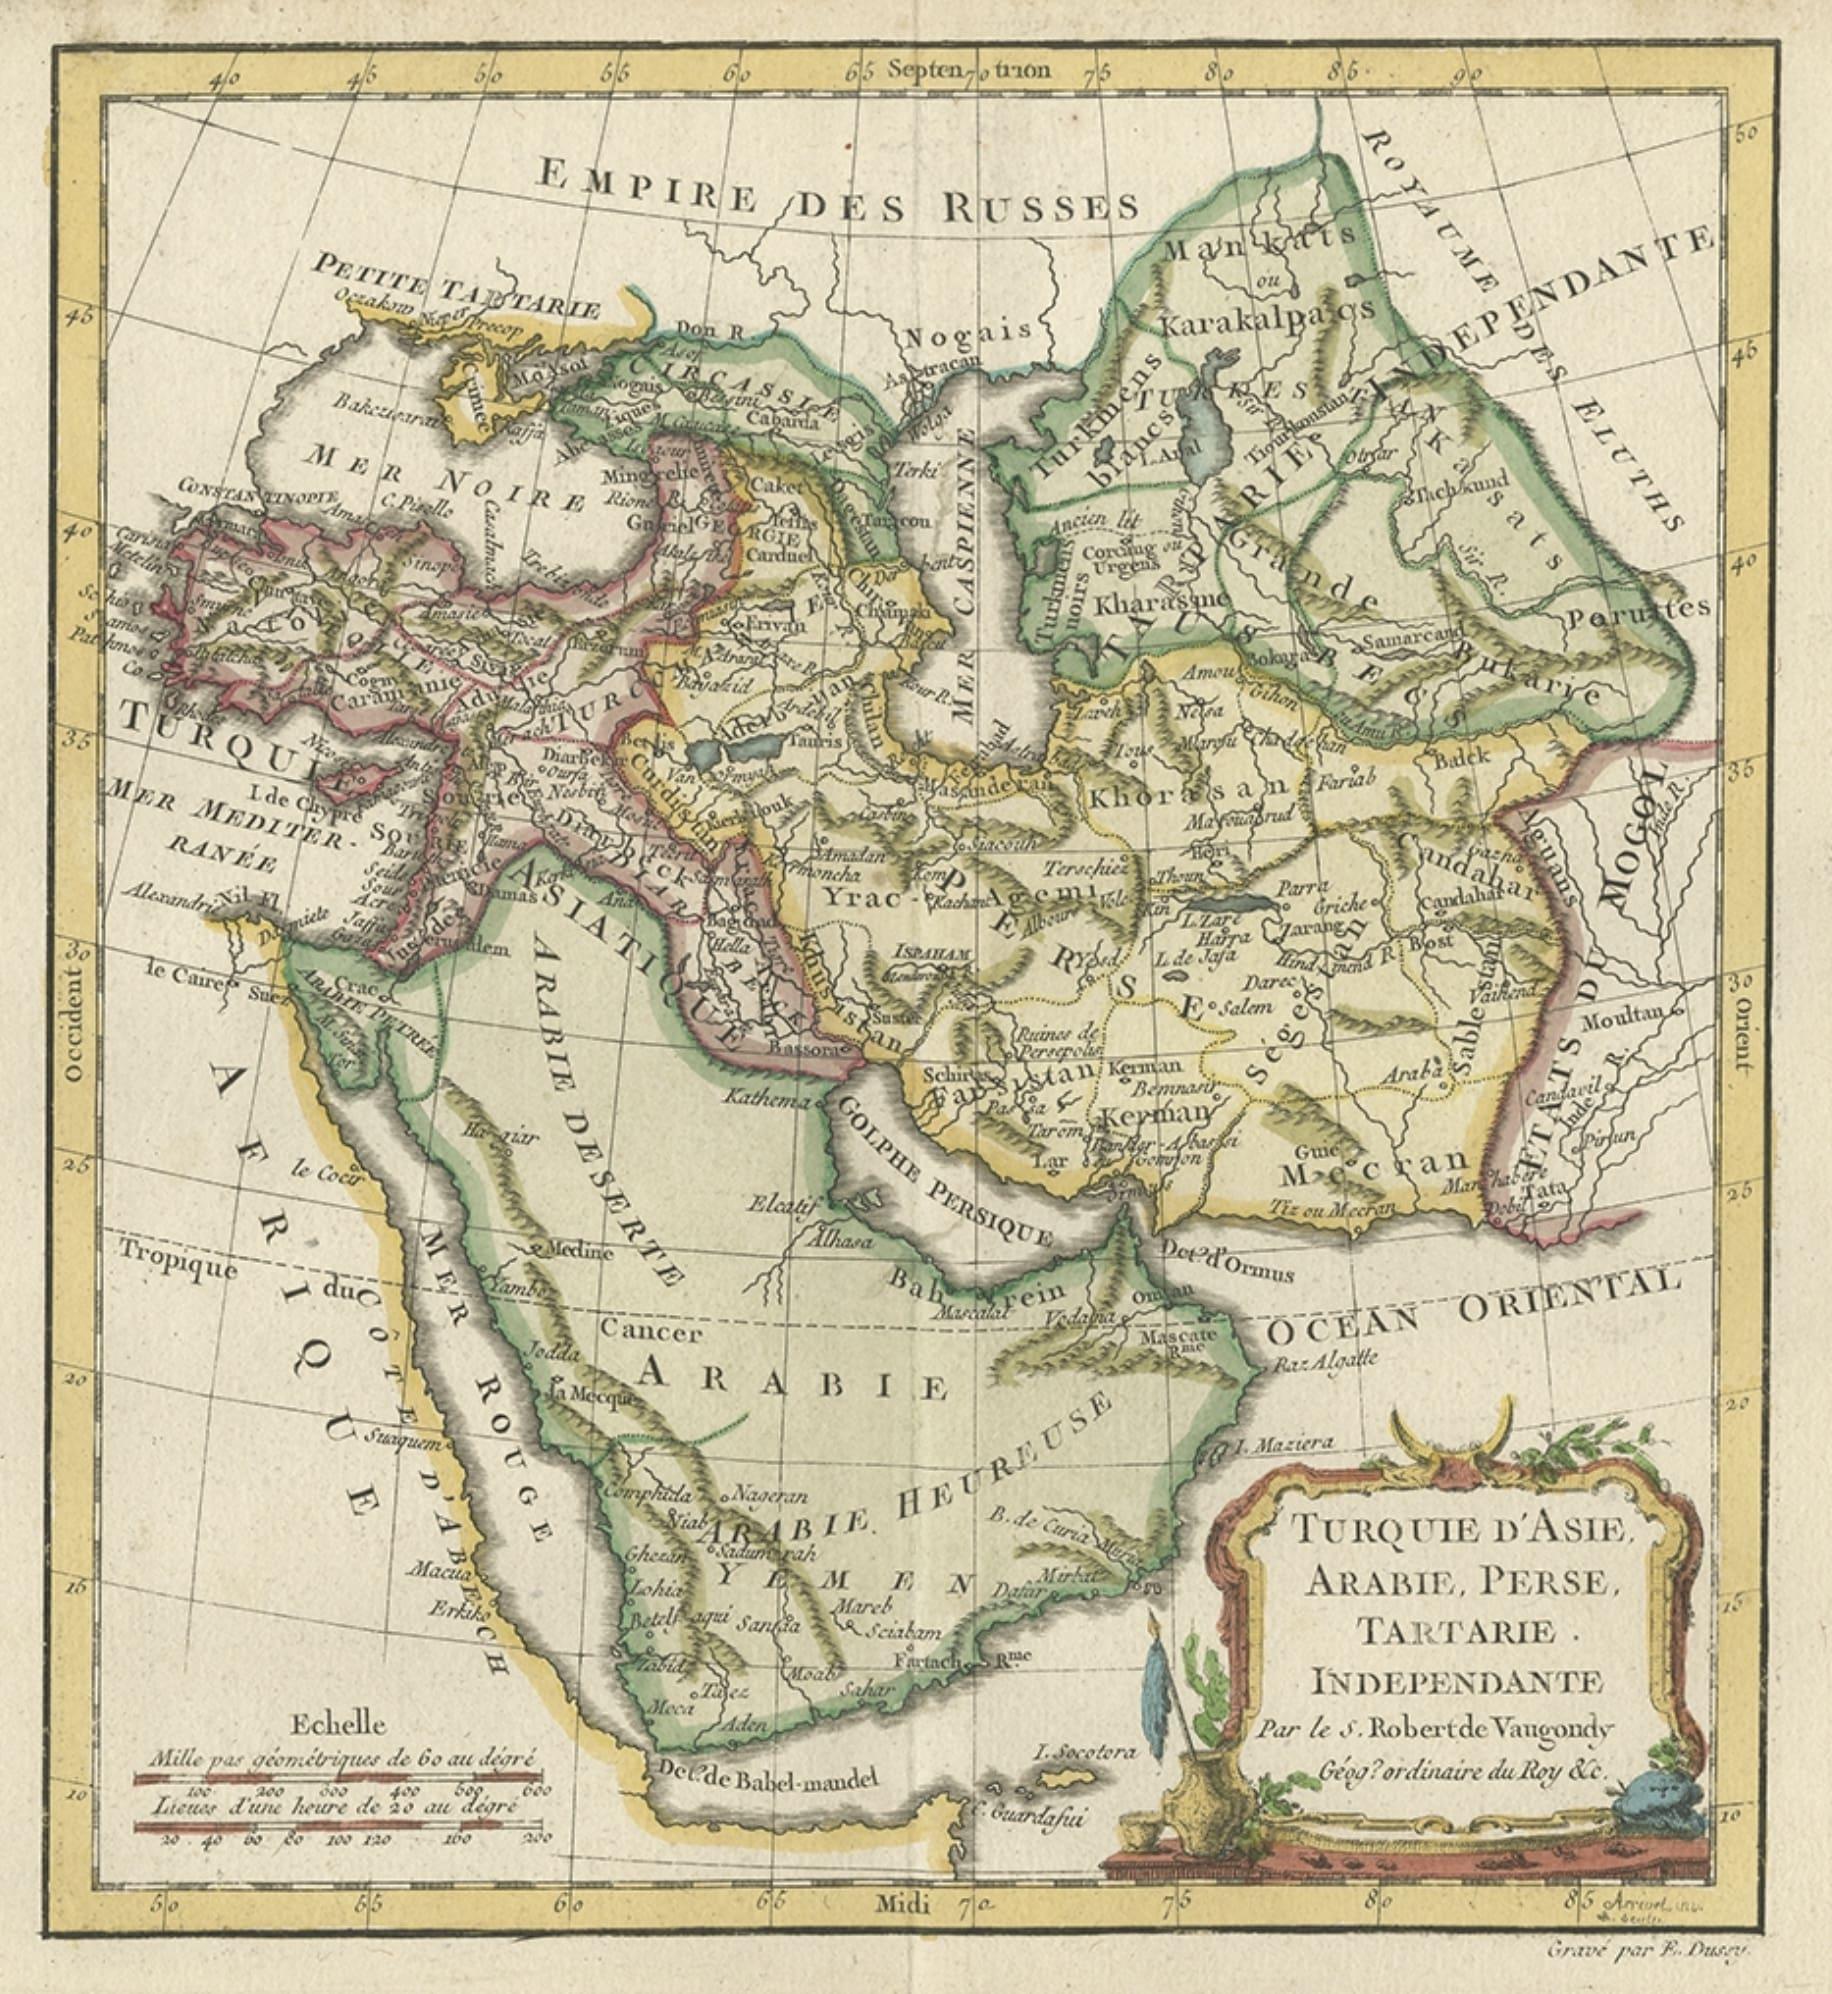 Antique map titled 'Turquie d'Asie, Arabie, Perse, Tartarie Independante'.

 Old map of Turkey in Asia. The map shows all of Turkey and the Black Sea, and extends east to include the Caspian Sea and the region of today's Afghanistan, Pakistan, and